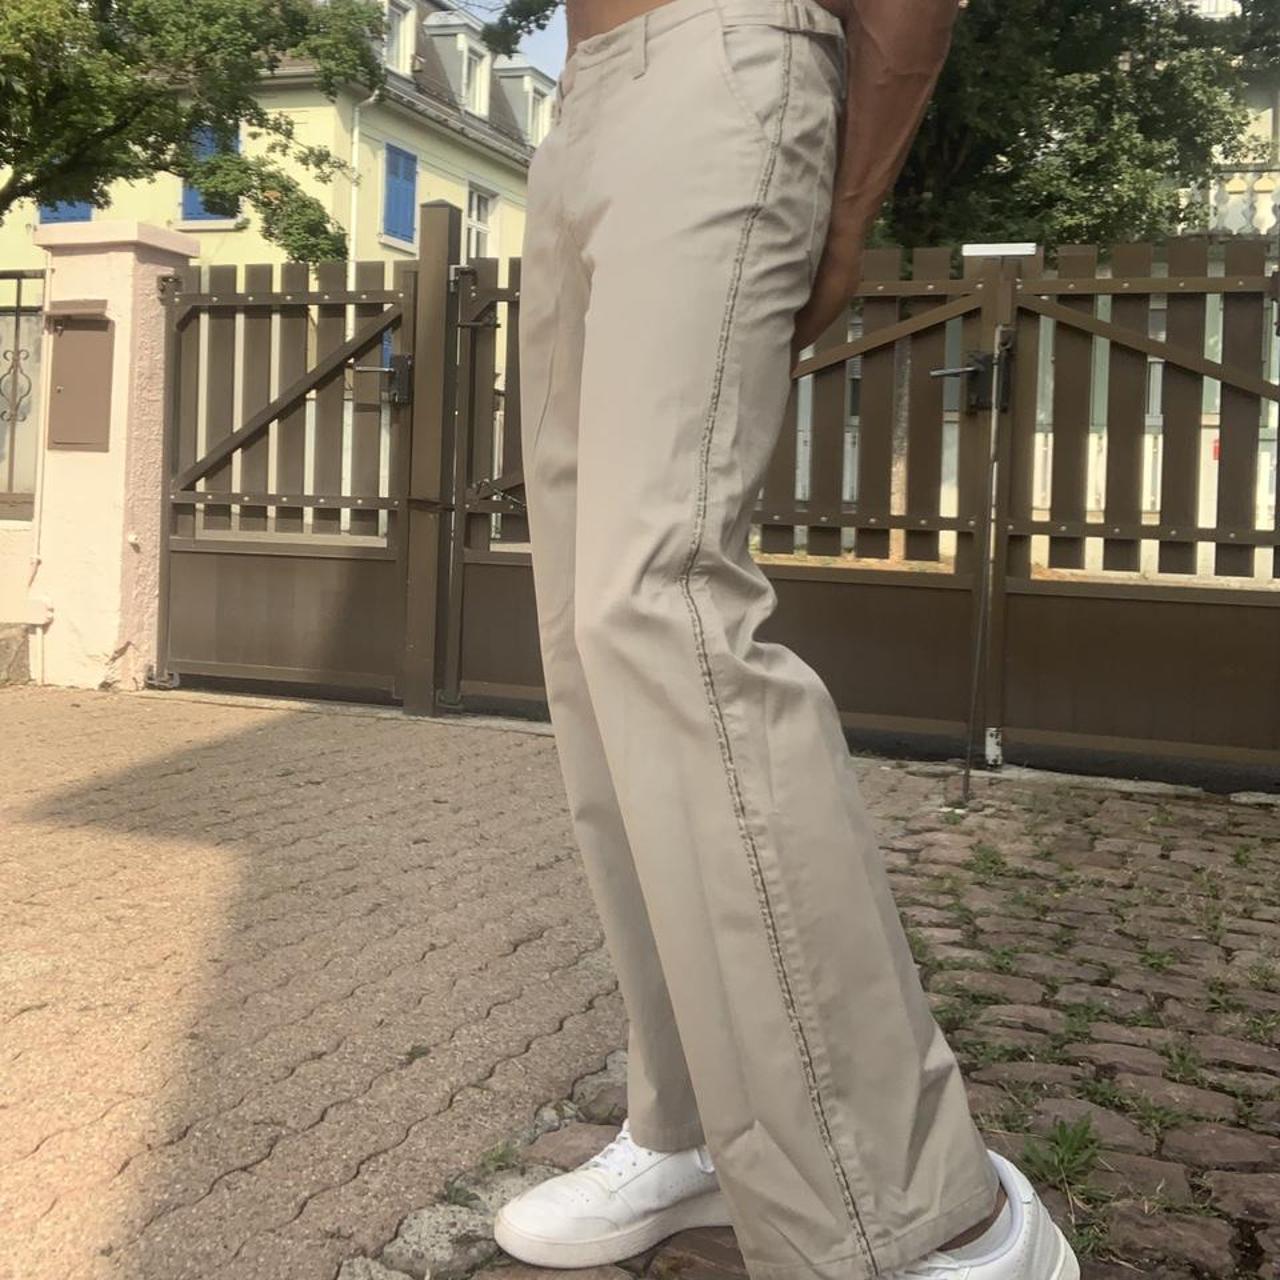 Product Image 3 - Vintage trousers beige .

WELCOME DEPOP